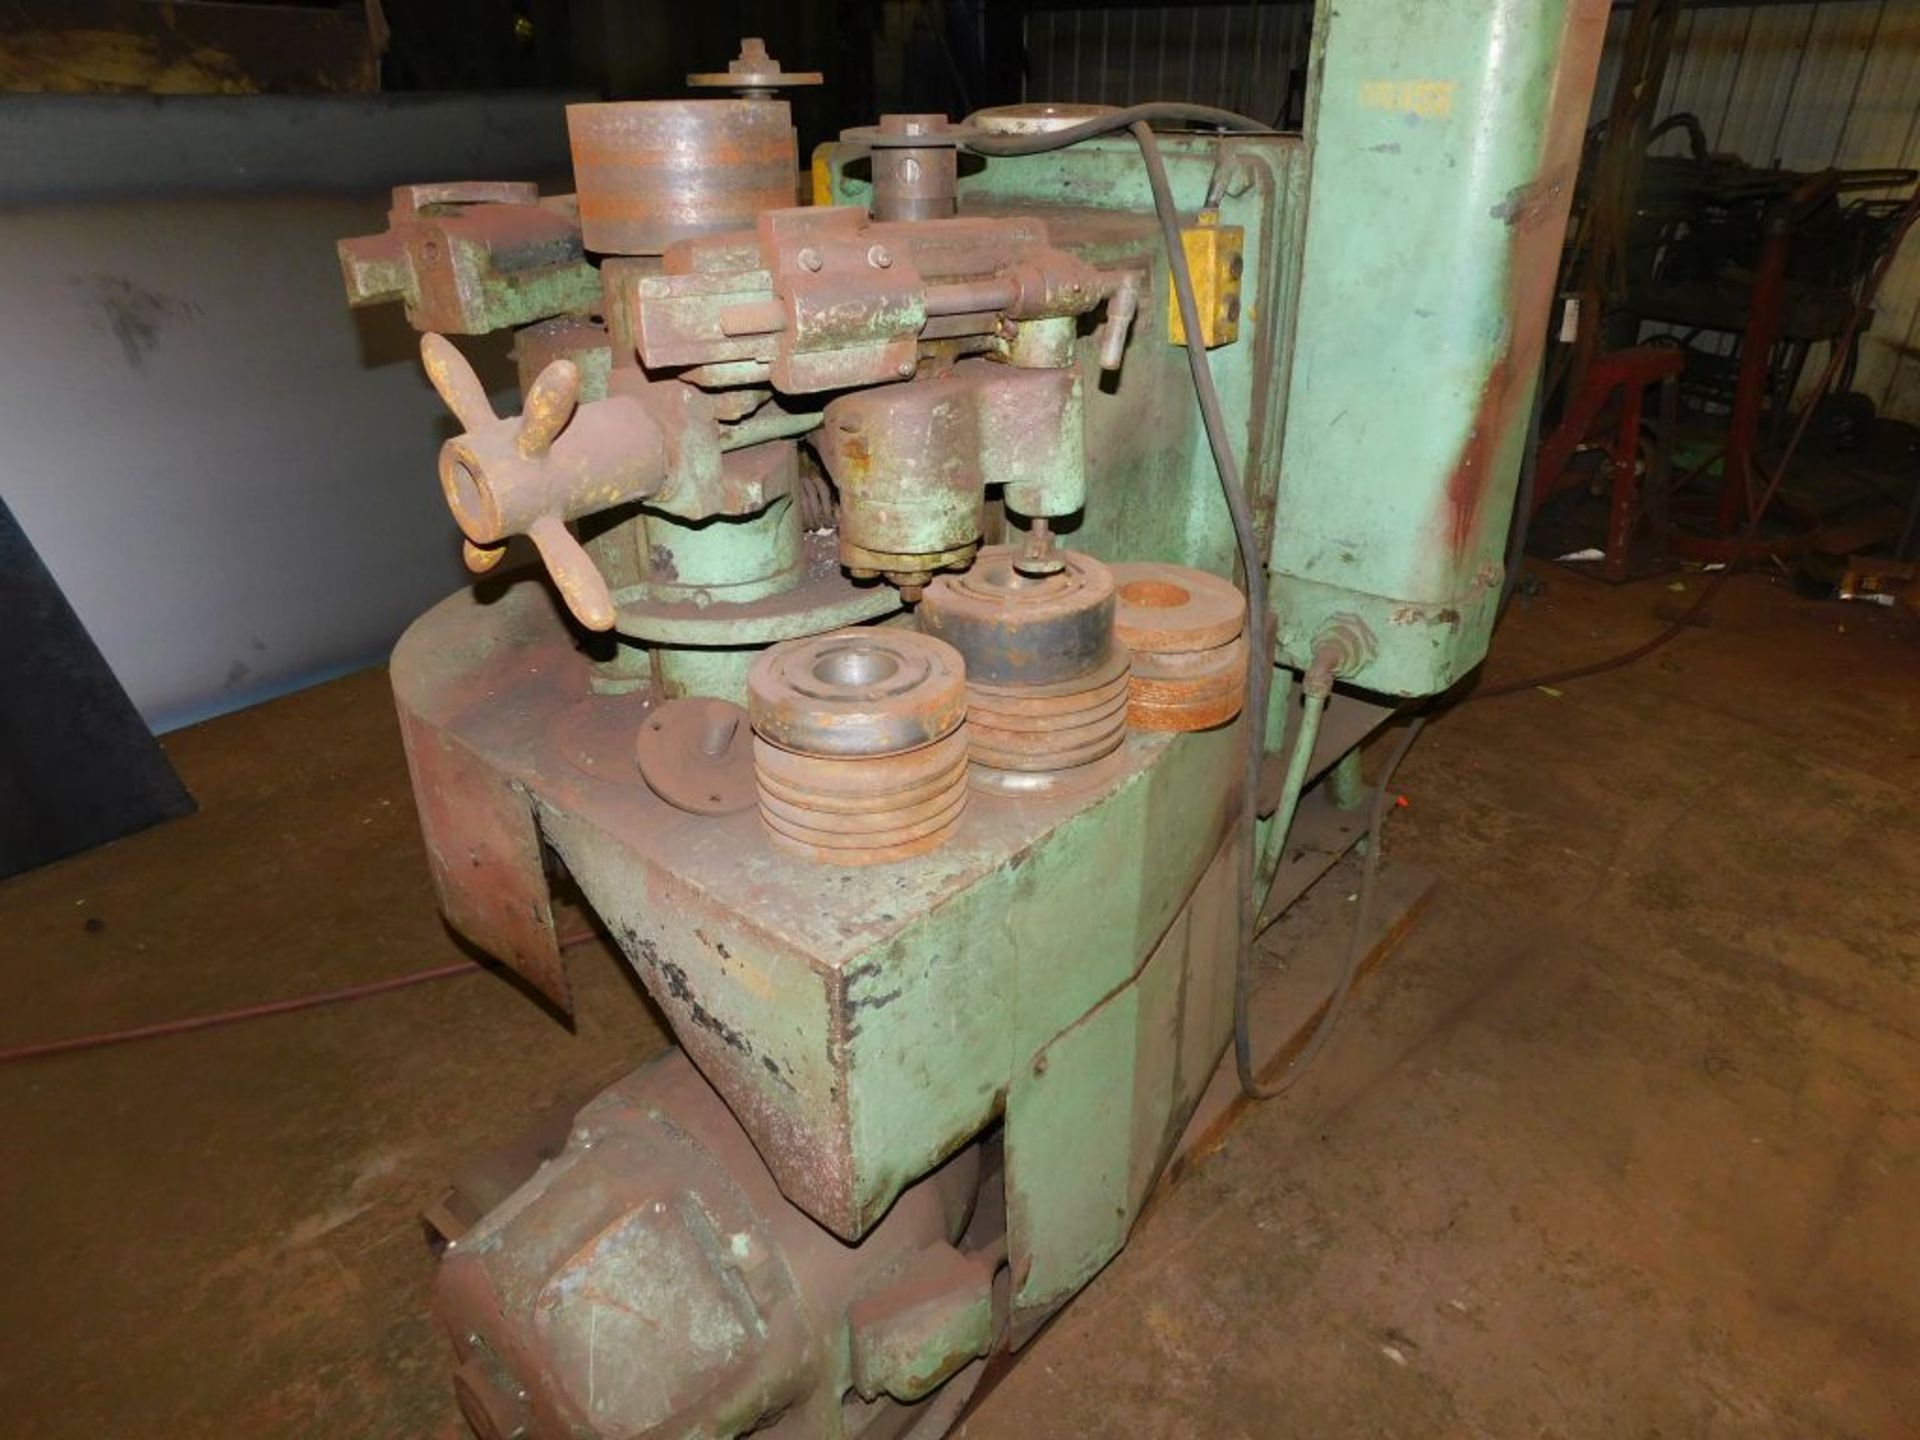 Buffalo angle roller, model 1-2HBR, sn 5115717, motor 5 hp, 3 ph. (LOCATED AT and to be picked up